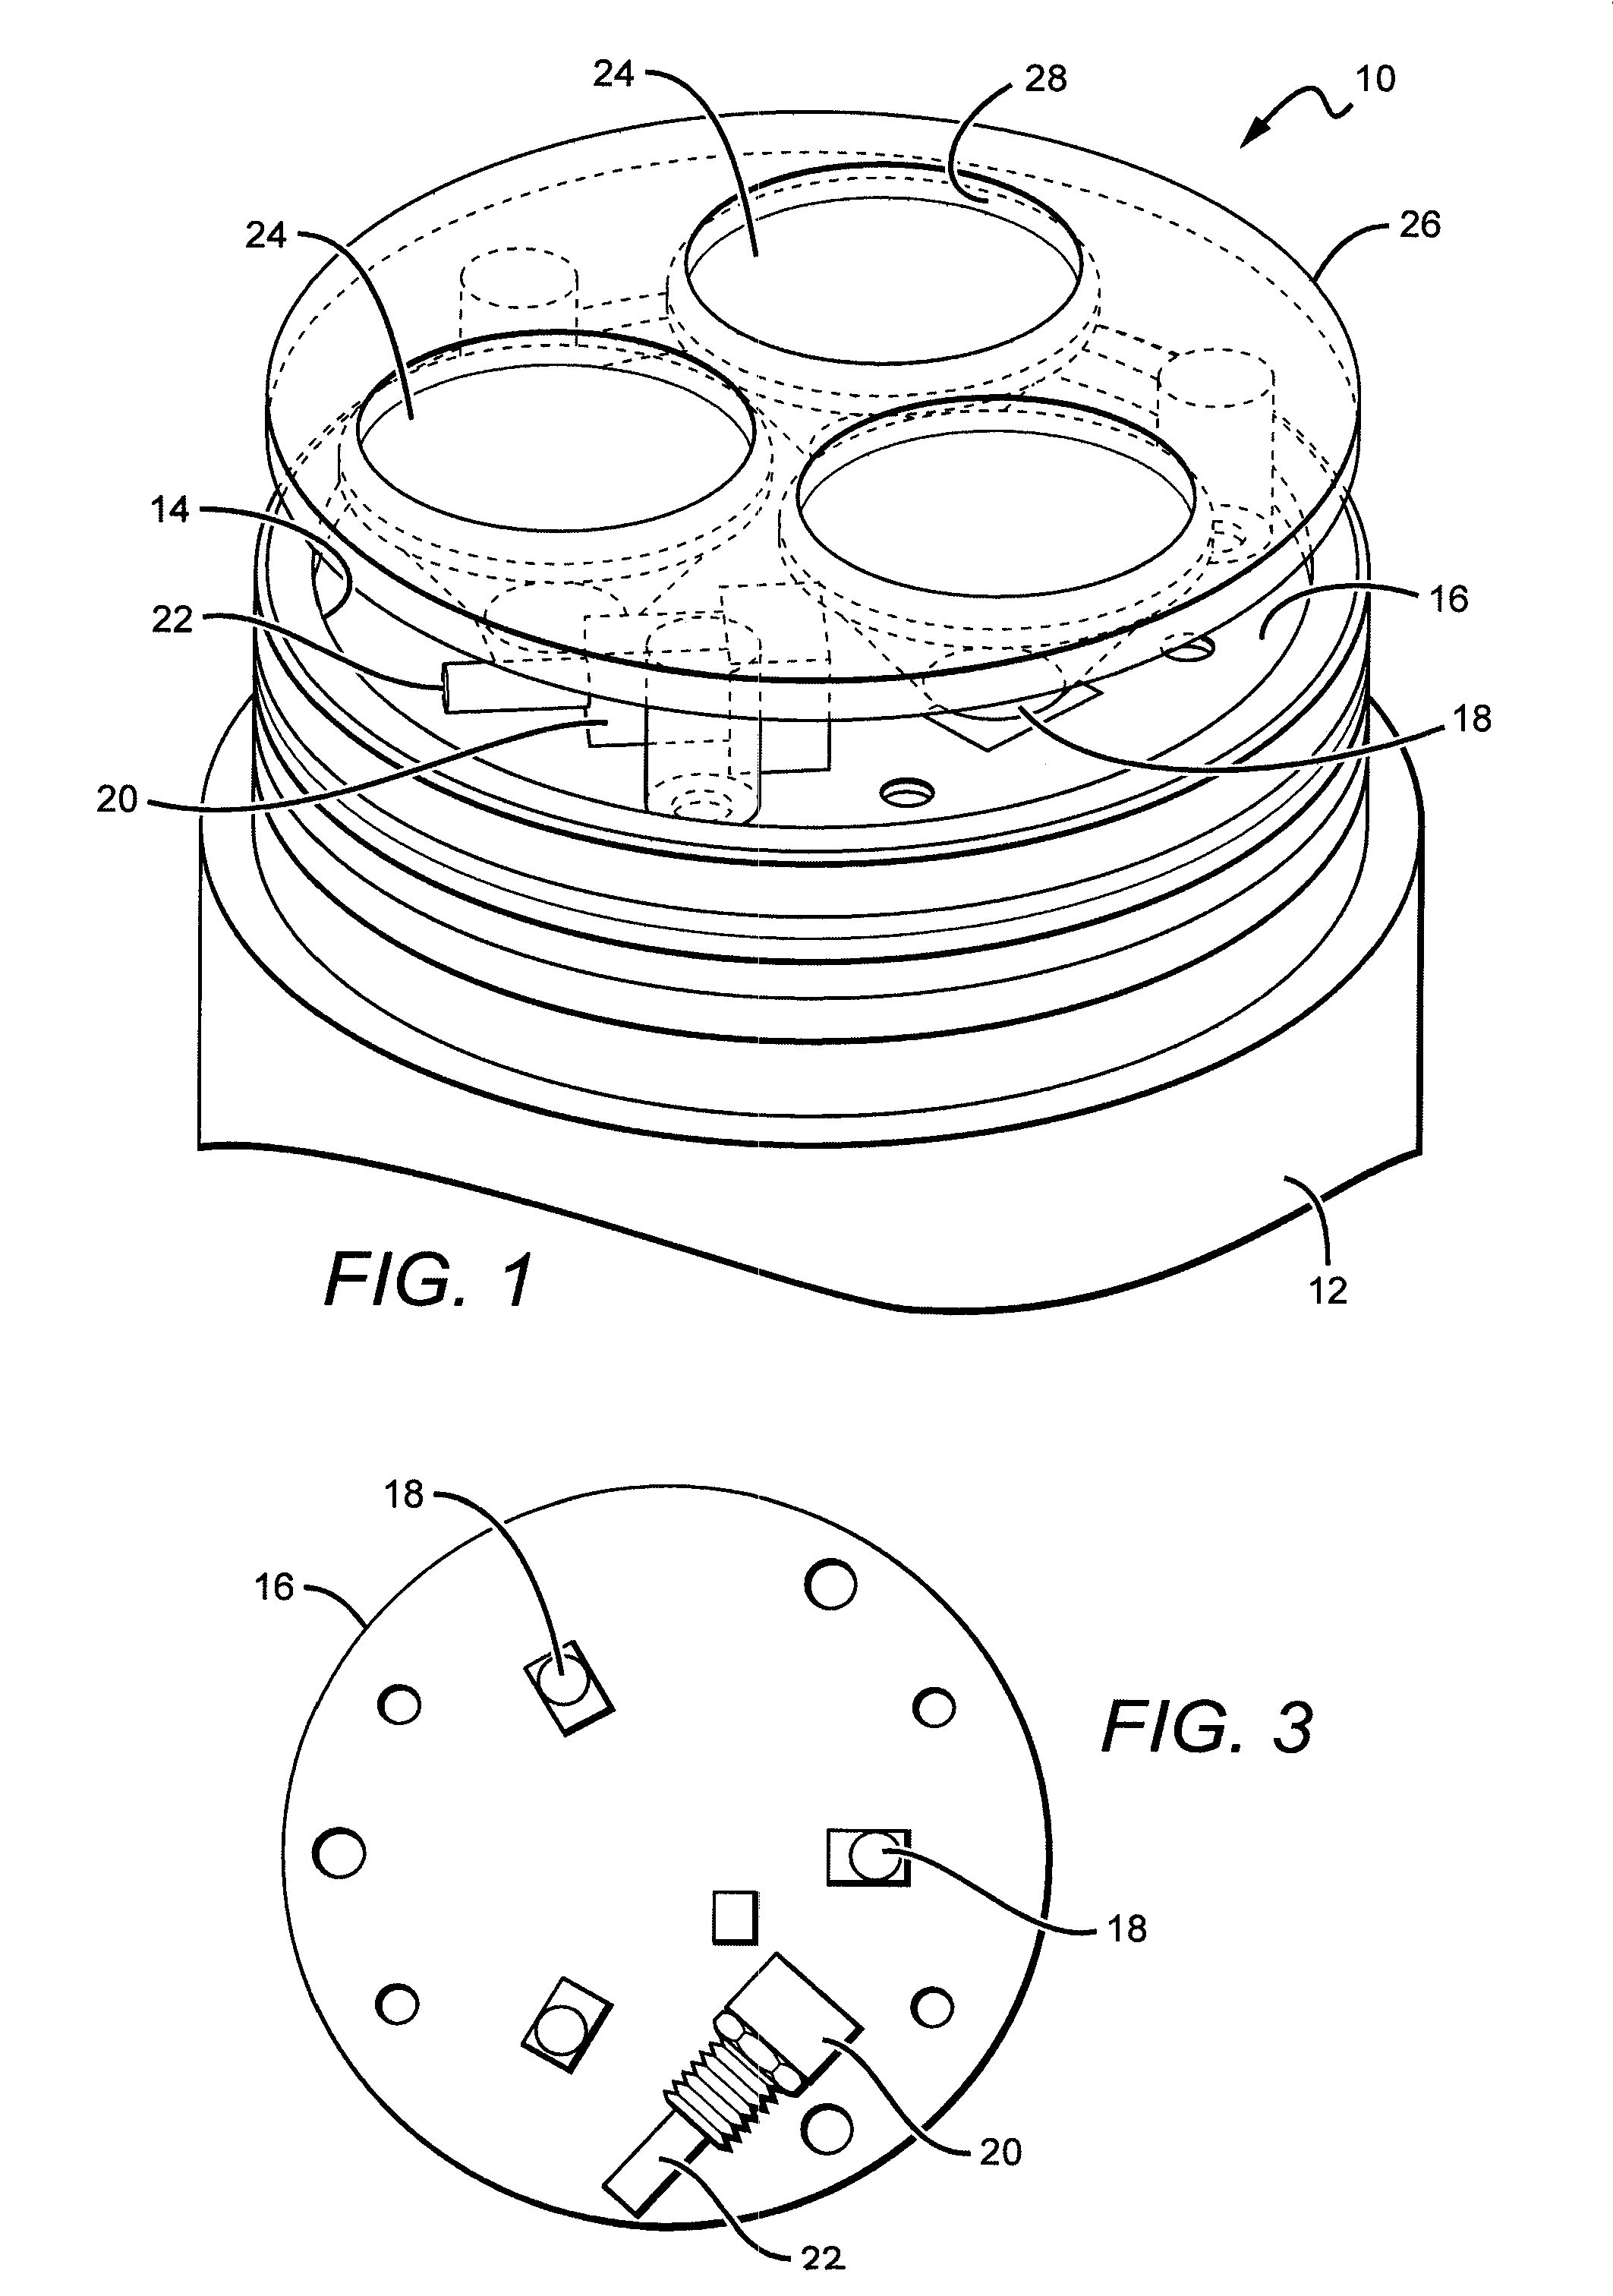 Dimming apparatus for solid state lighting fixtures